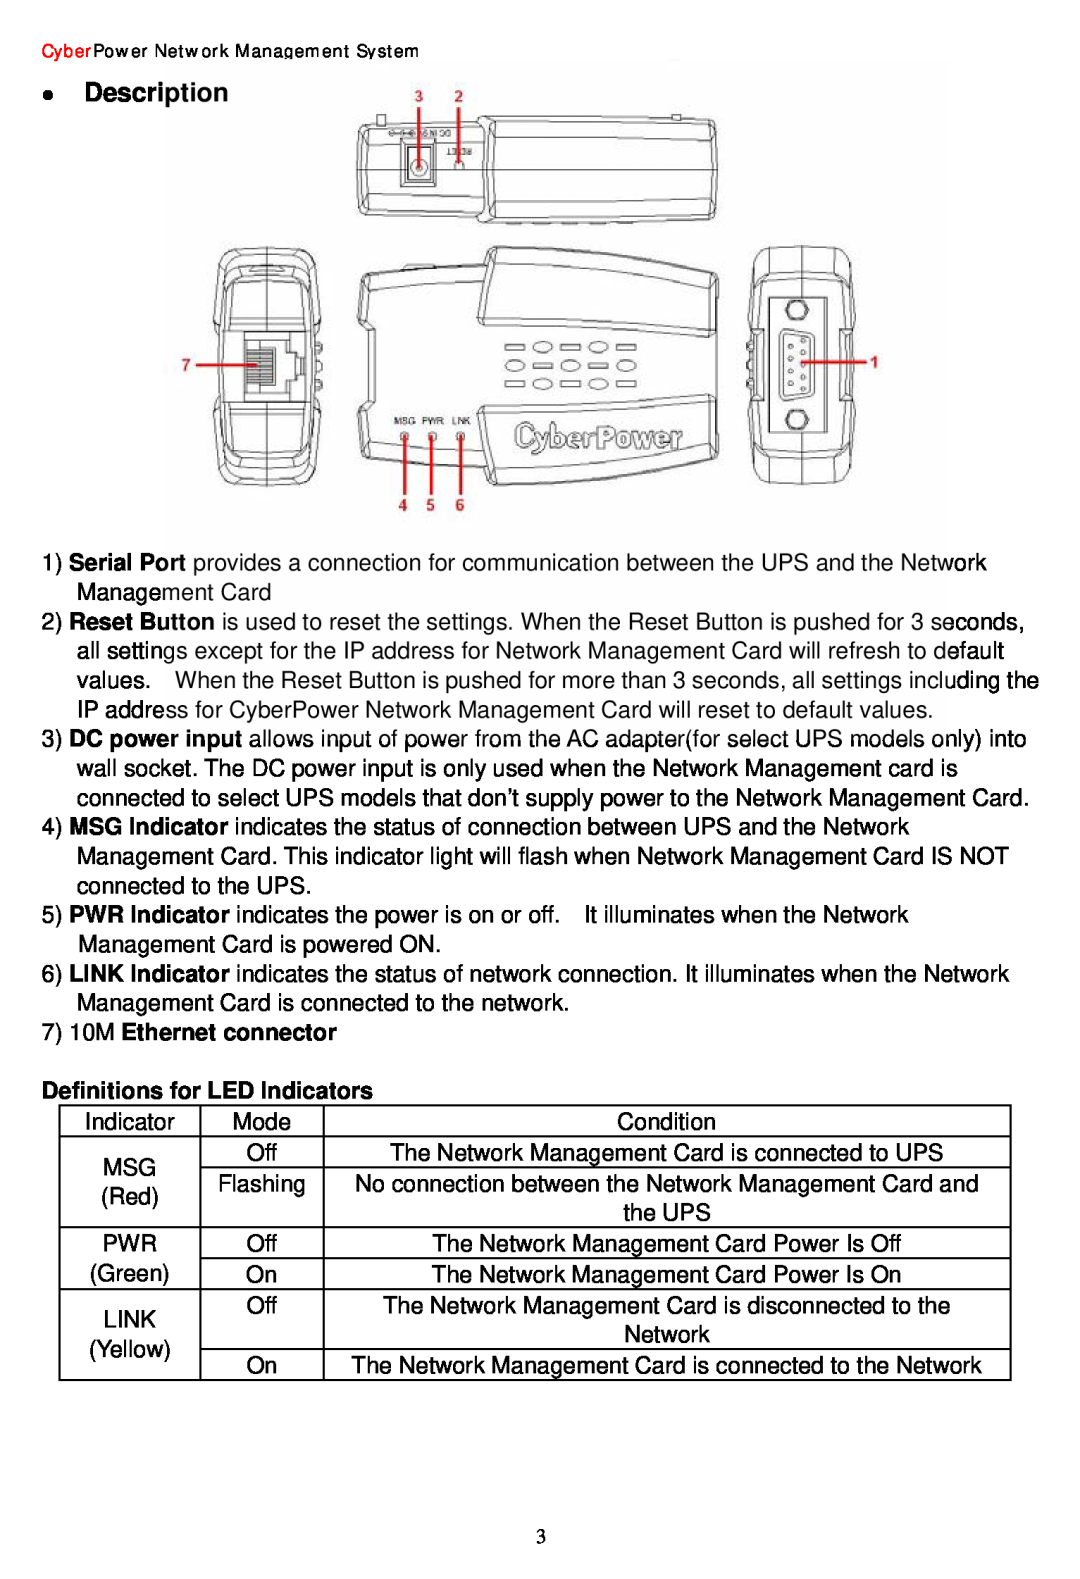 CyberPower Systems Network Management Card z Description, 7 10M Ethernet connector, Definitions for LED Indicators 